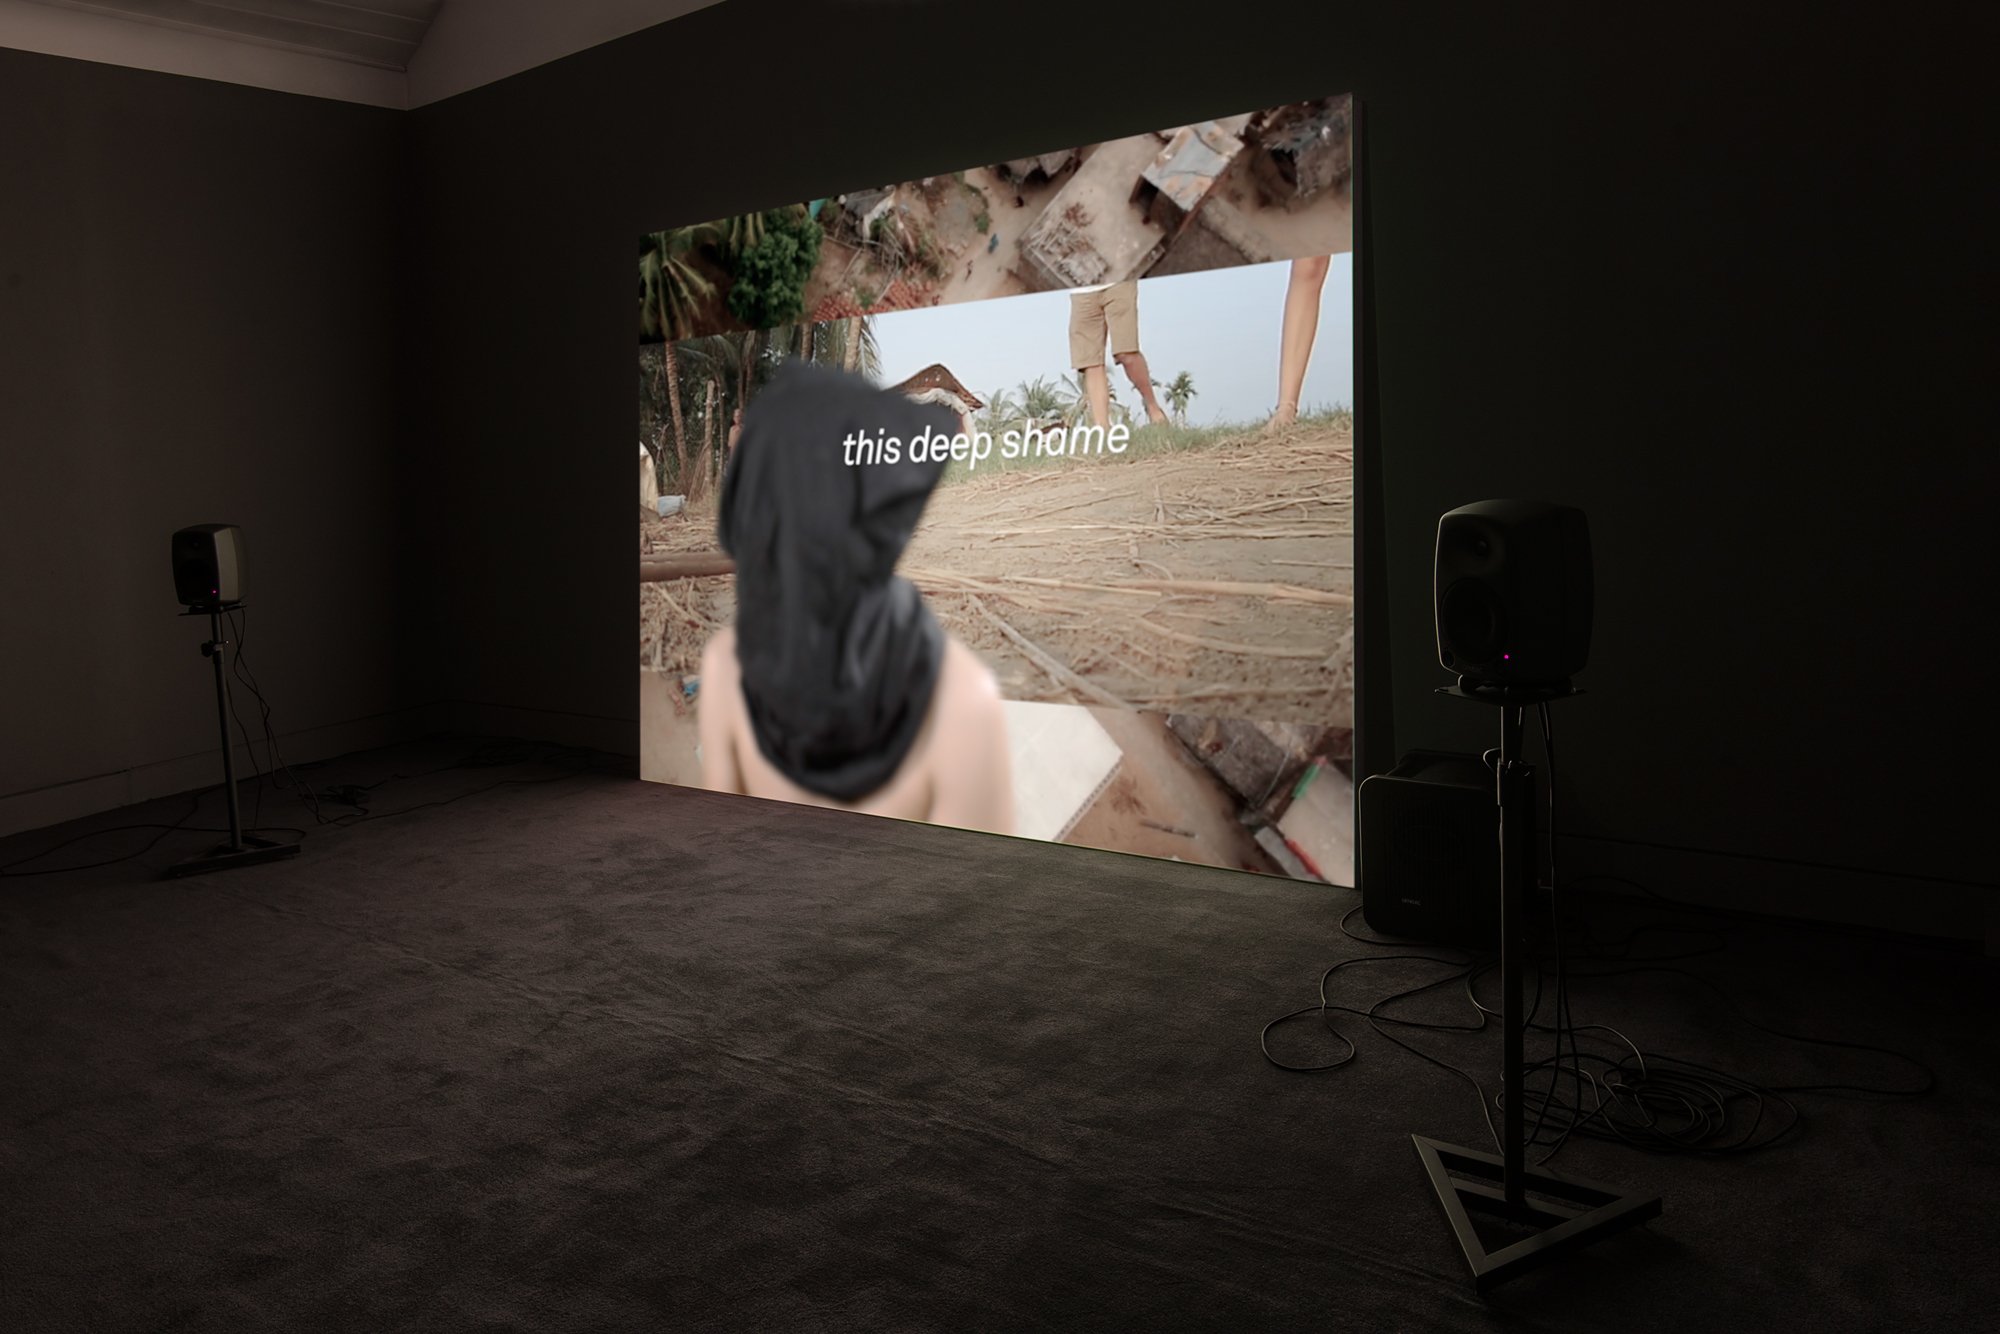 An exhibition installation featuring a large projection screen at the centre, flanked by speakers on each side. The screen displays a collage of digital images, in the foreground is an image of a person wearing a cloak over the head and bared torso. The person is in soft focus and is overlaid with text that reads: "this deep shame."